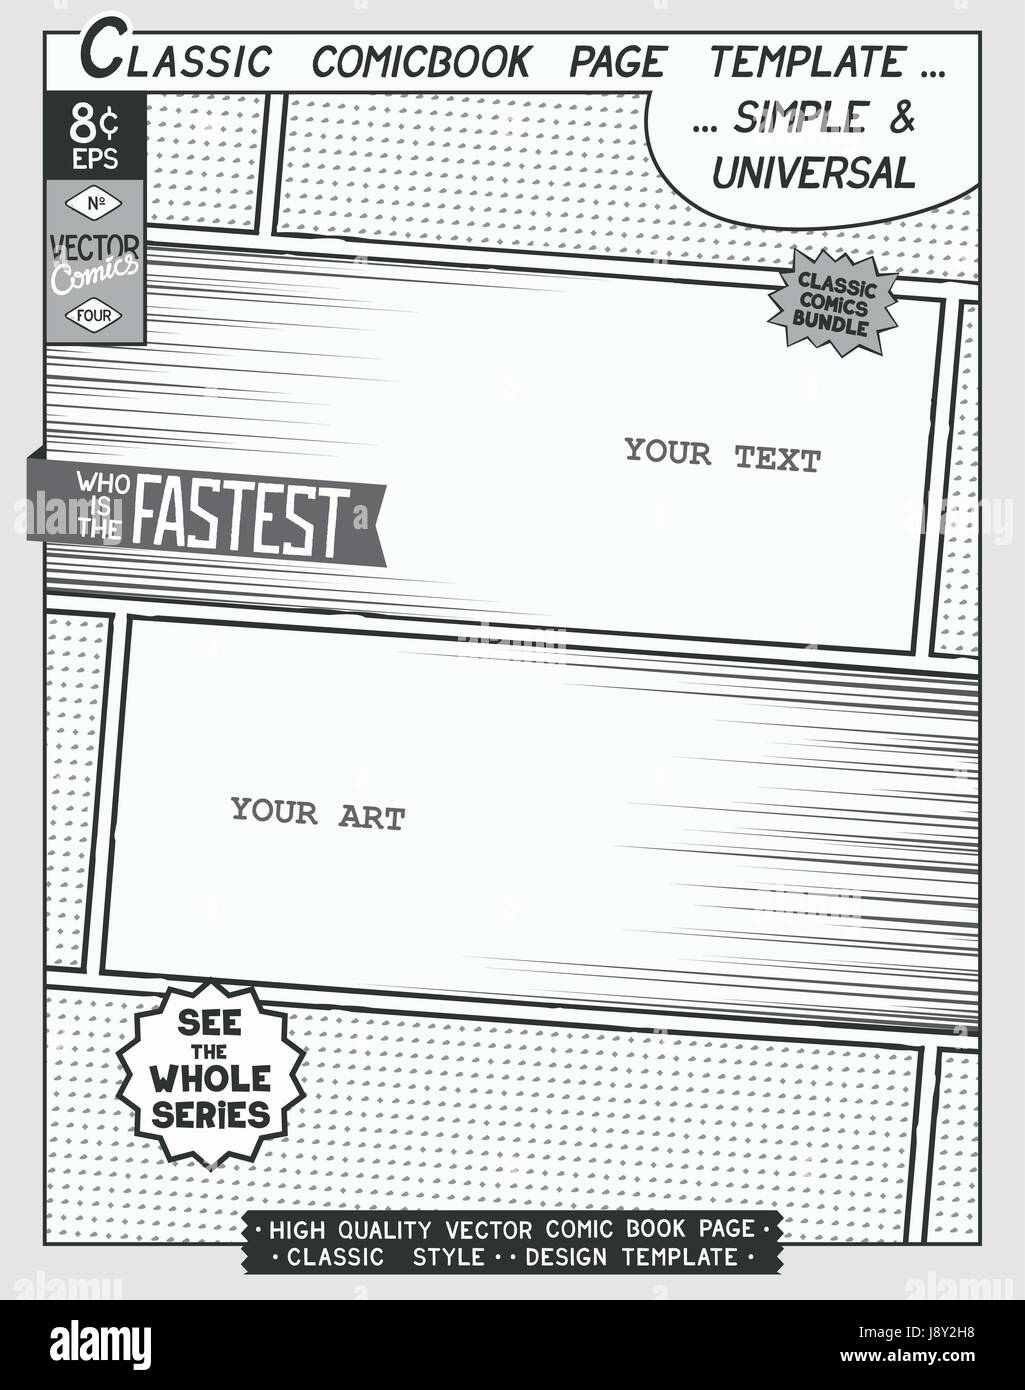 Comic Book Format Template from c8.alamy.com